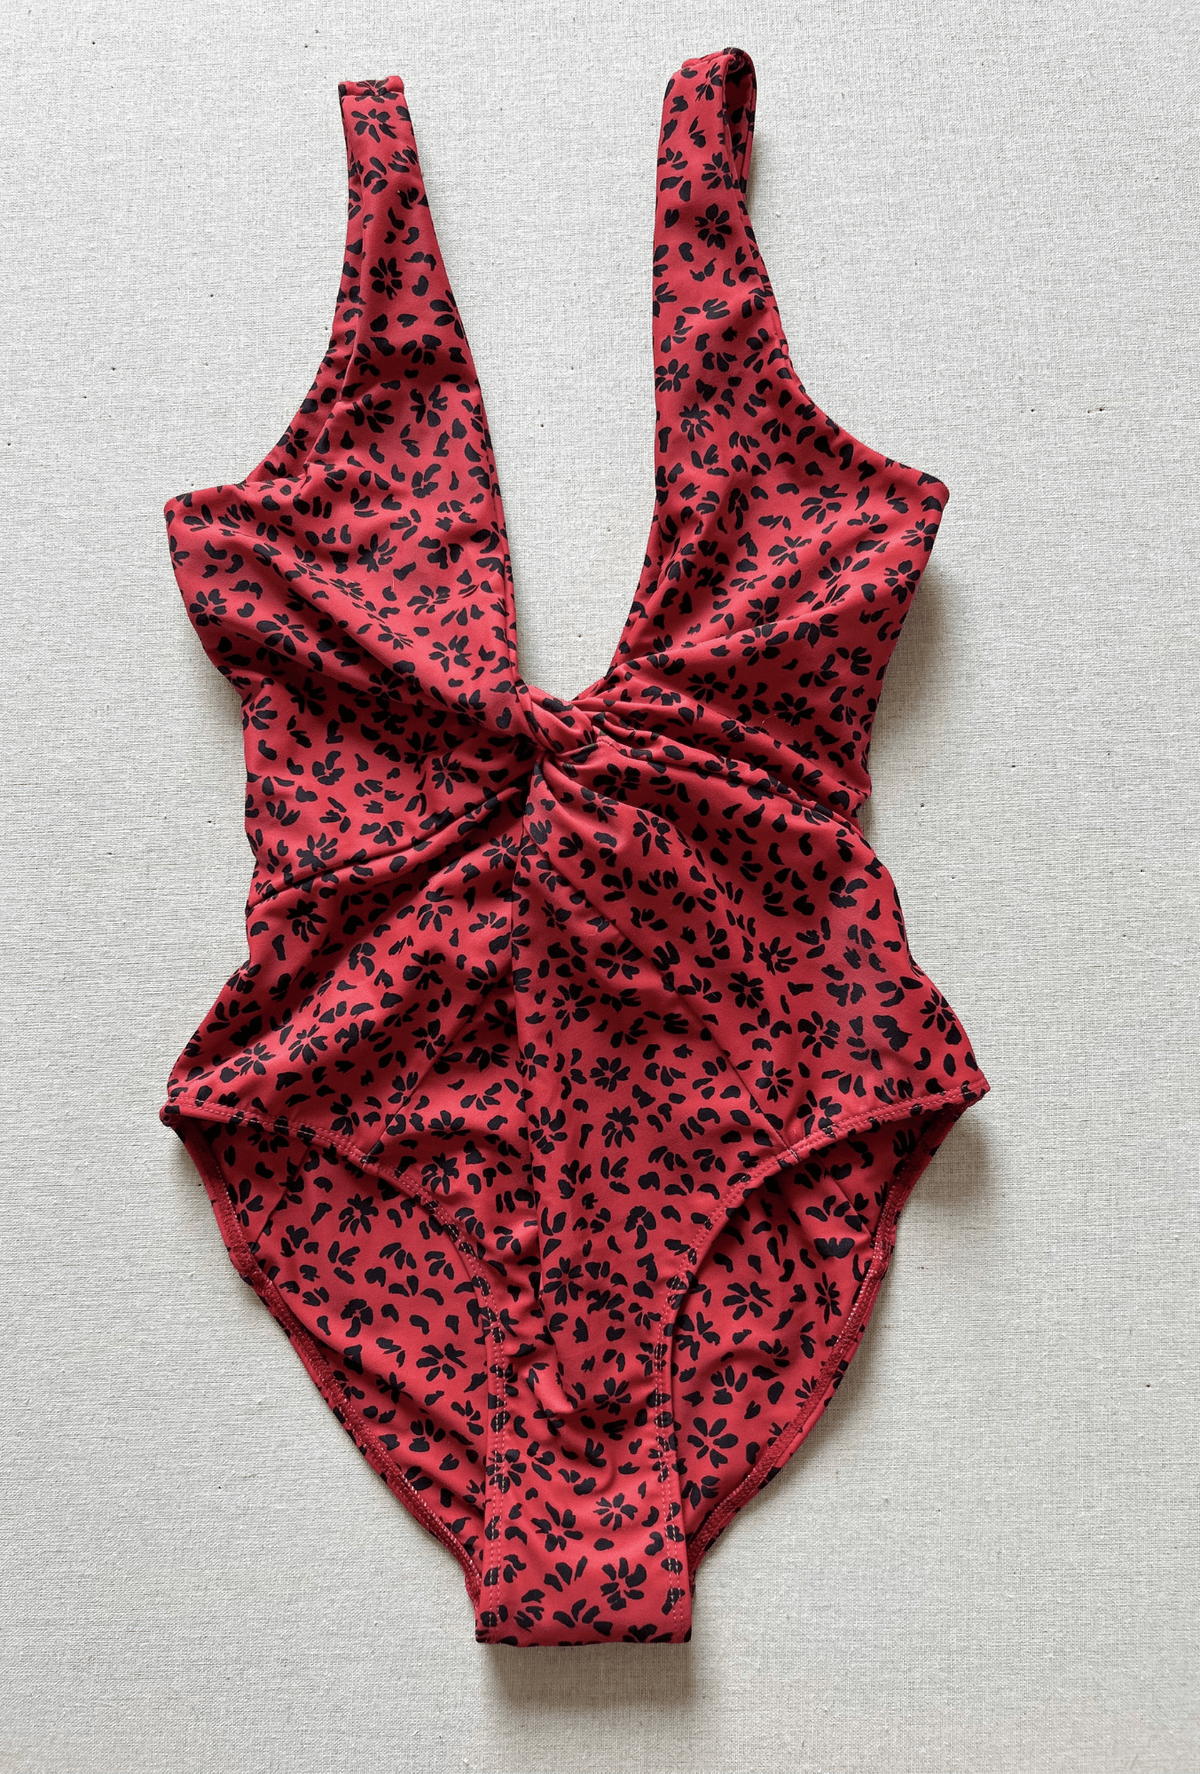 elle one piece in red floral - size xs